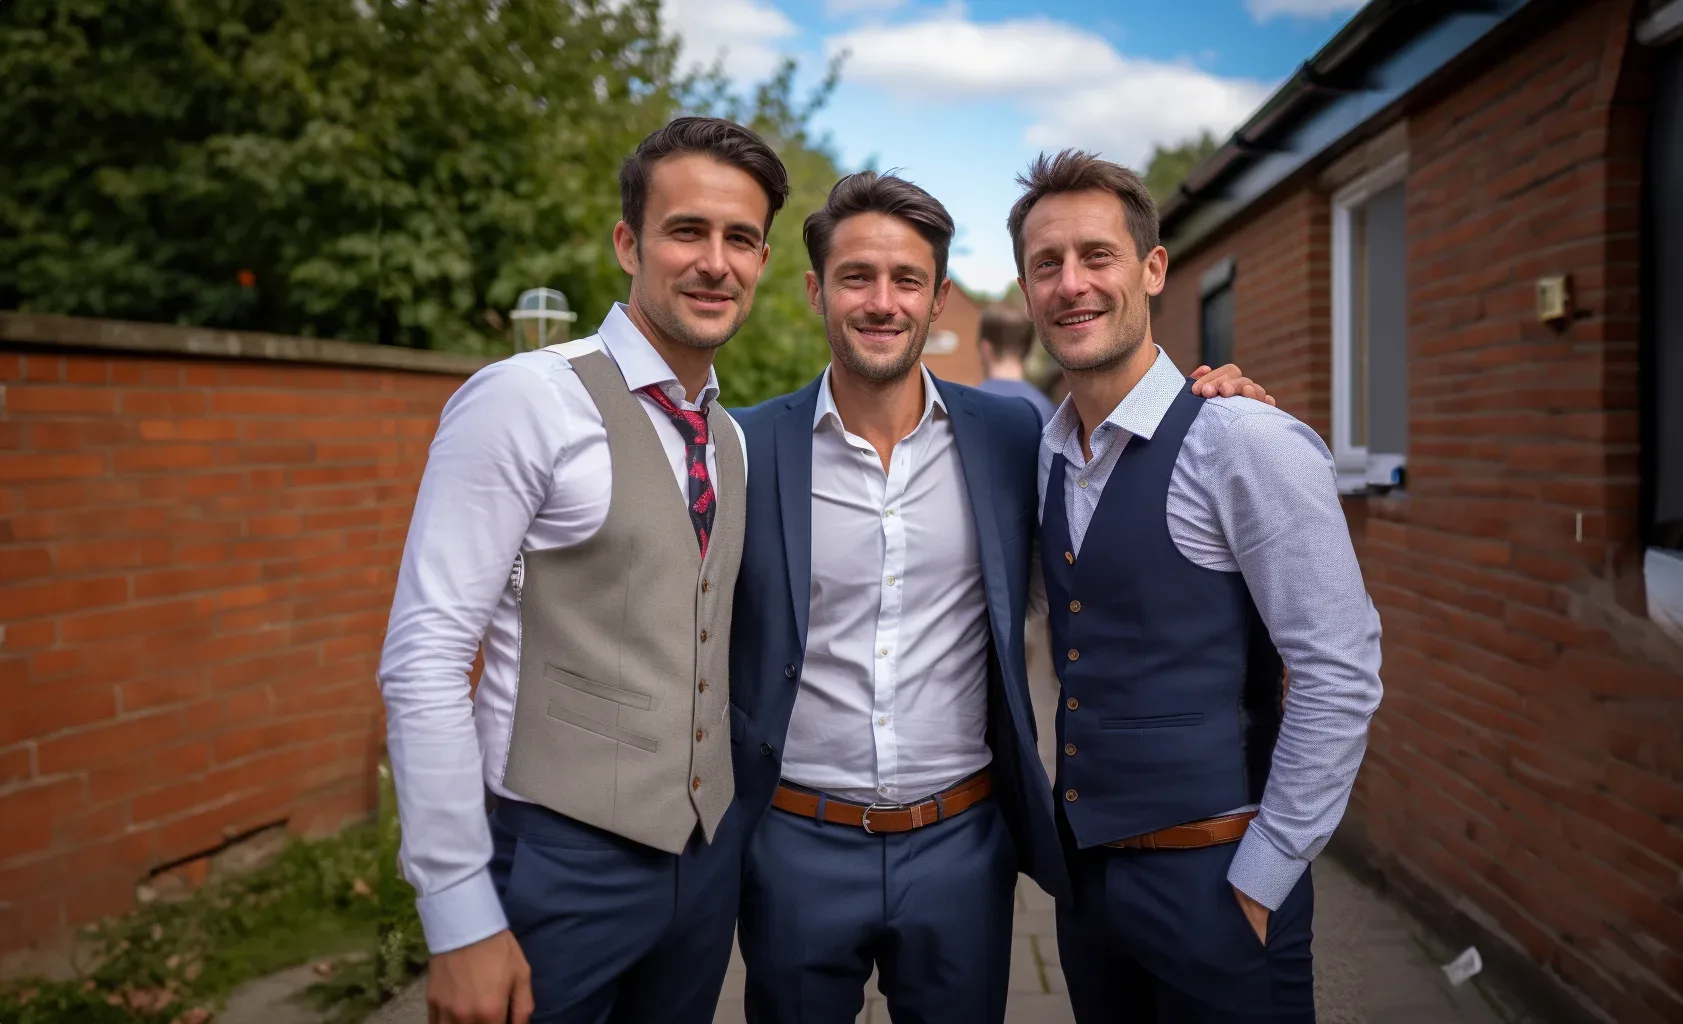 Three men in suits posing for a photo.